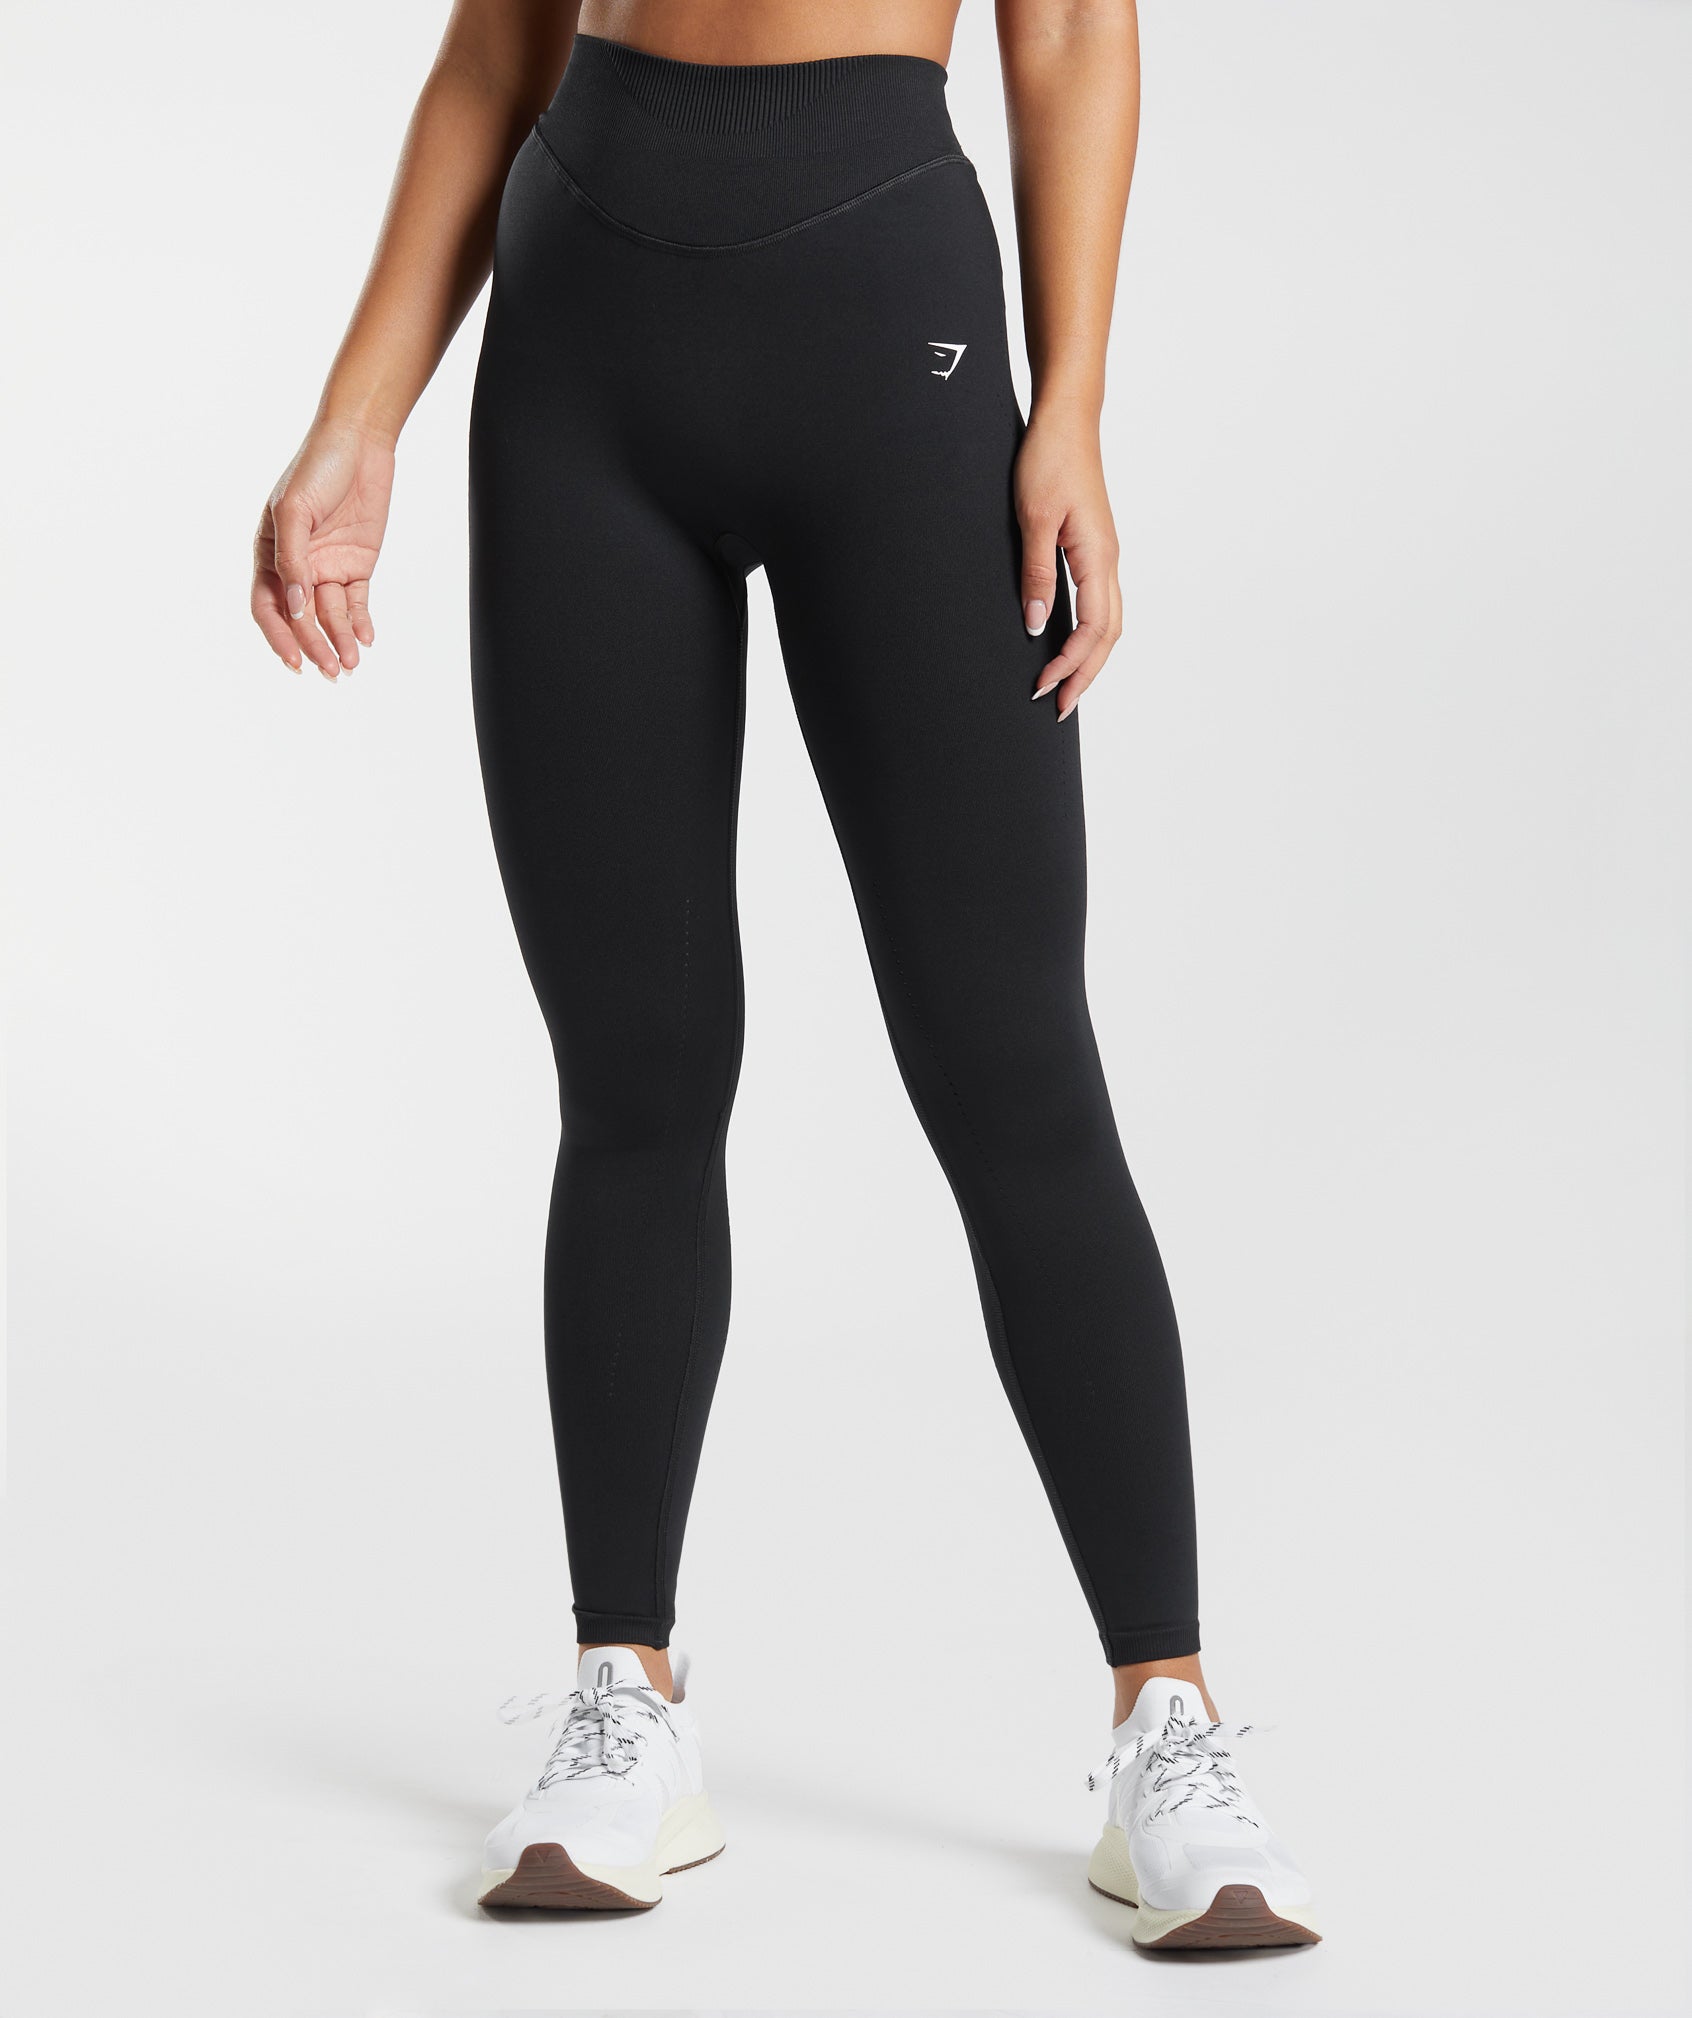 INNERSY Leggings for Women High Waisted Compression India | Ubuy